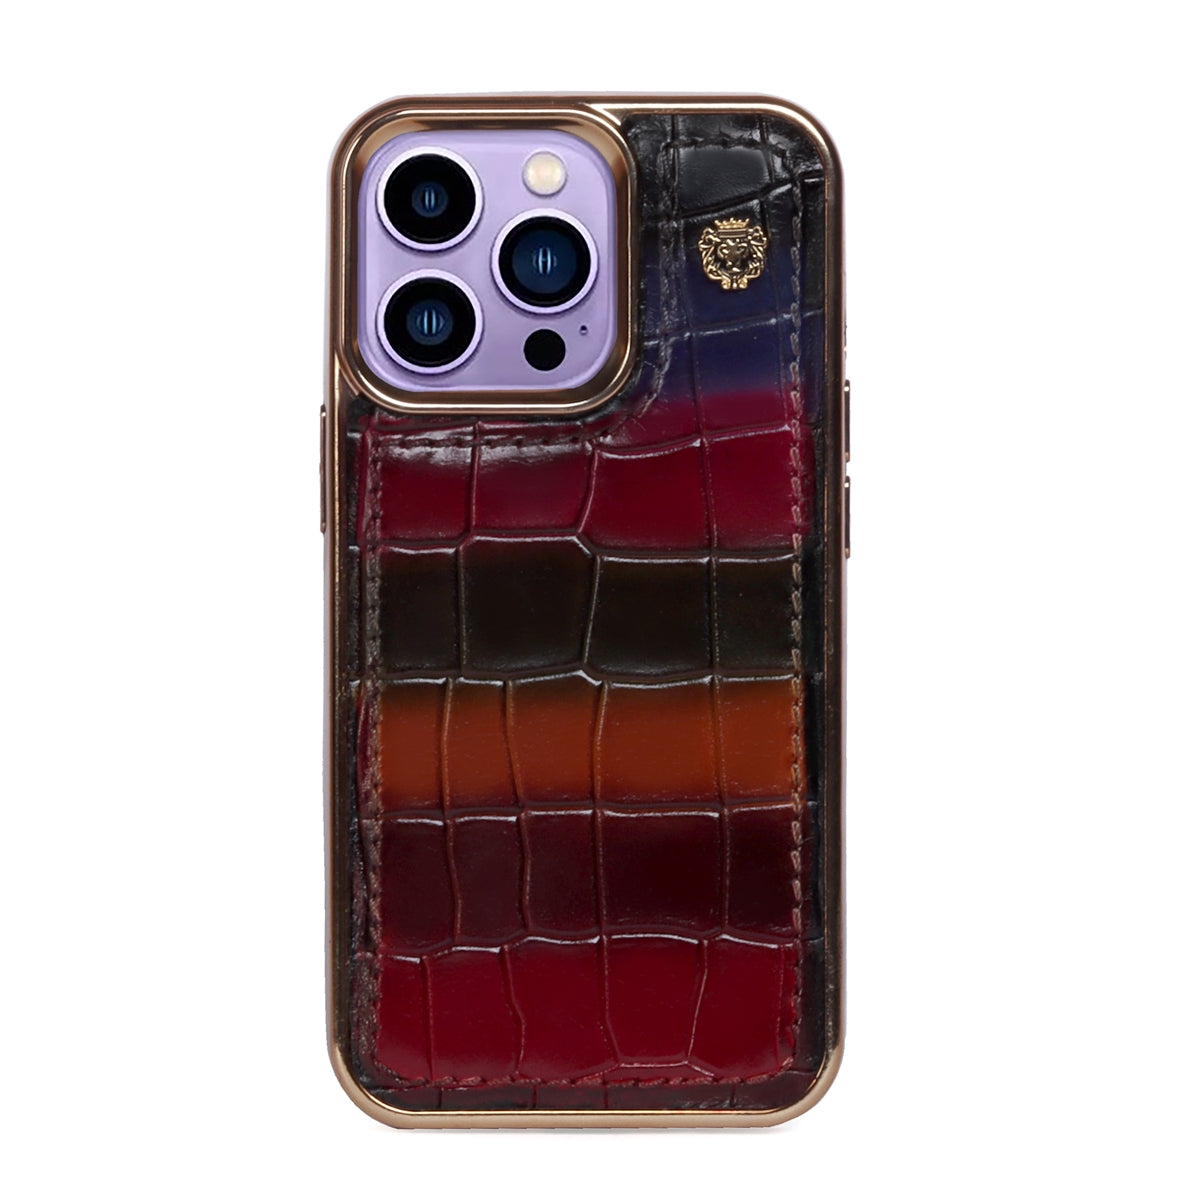 Golden Rim Mobile Cover Multi Color Leather iPhone Series Metal Lion